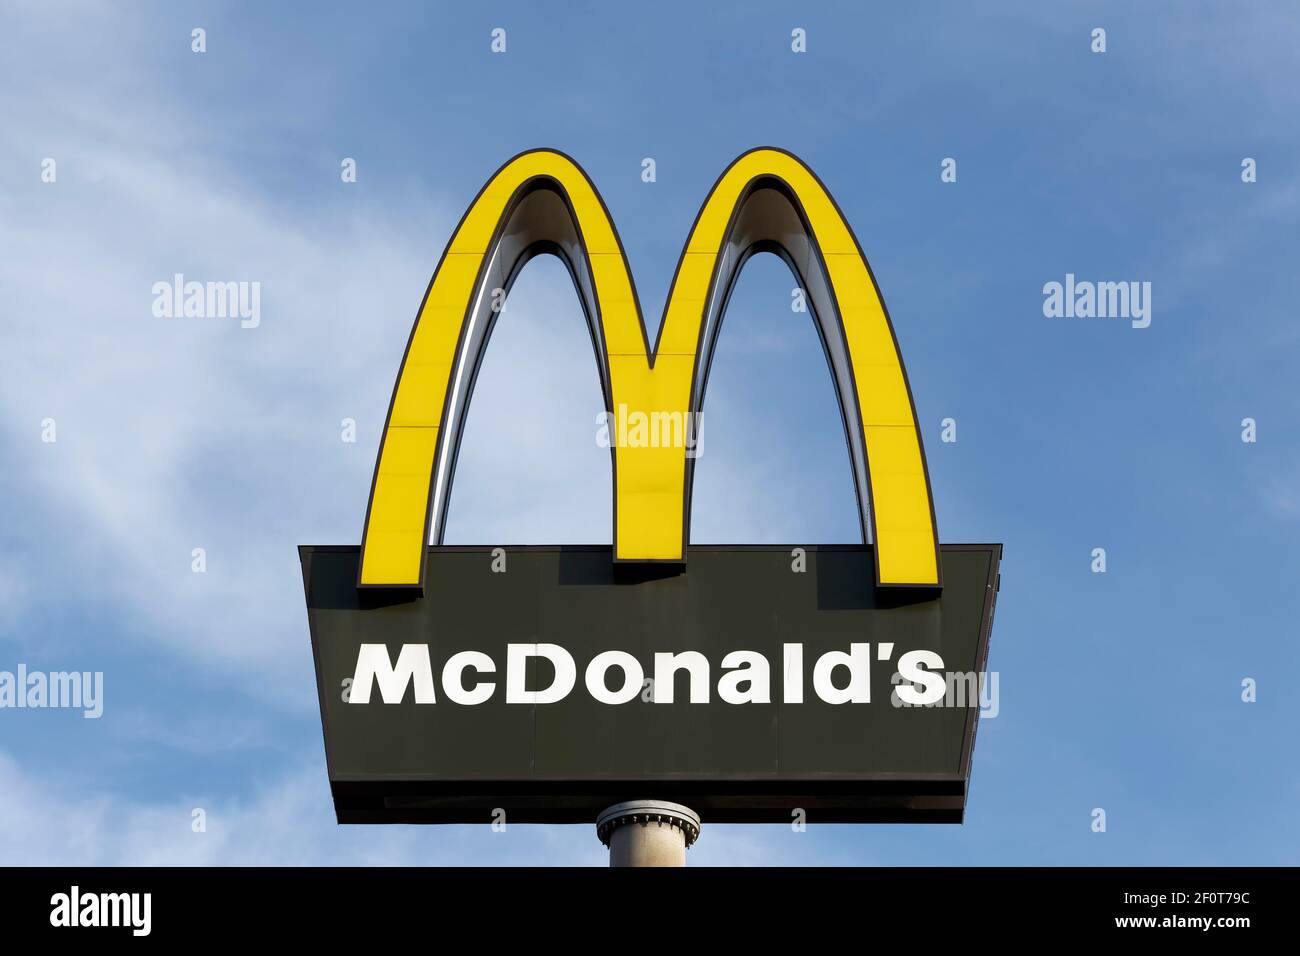 McDonald's, logo in front of blue sky, Duesseldorf, North Rhine ...